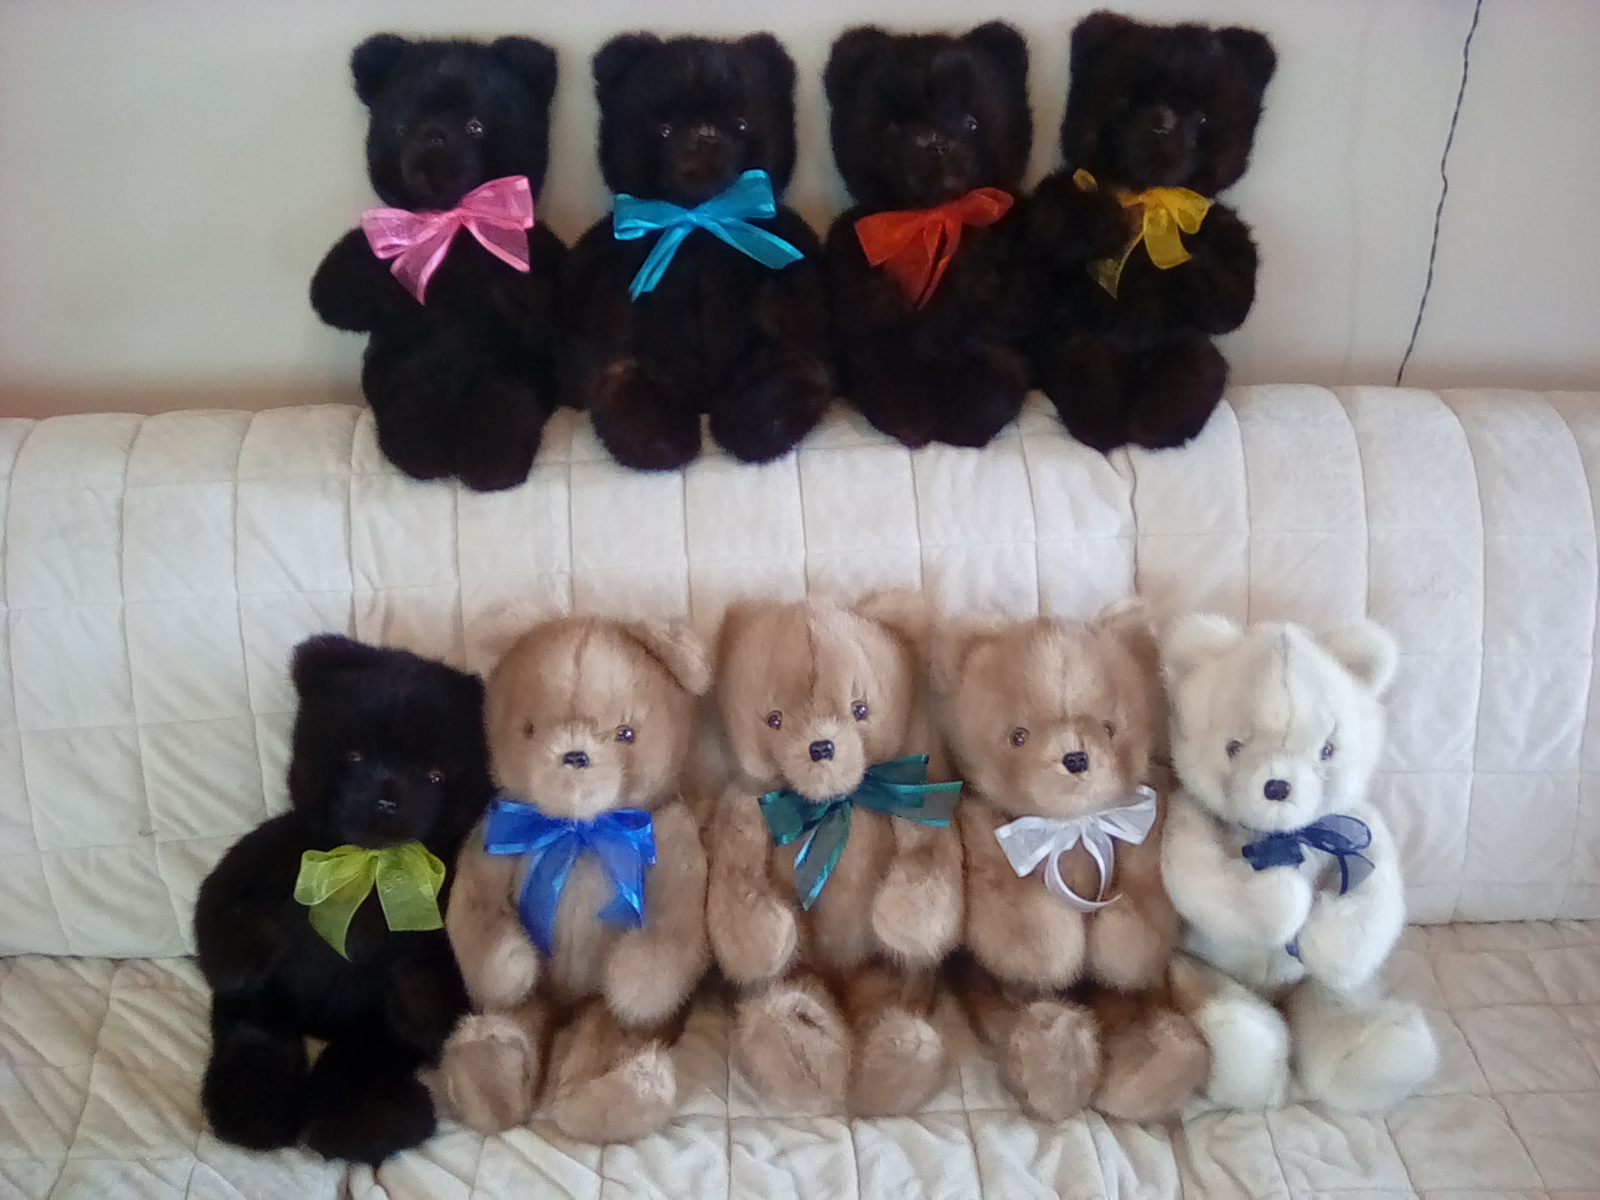 Bears from multiple fur types & colors